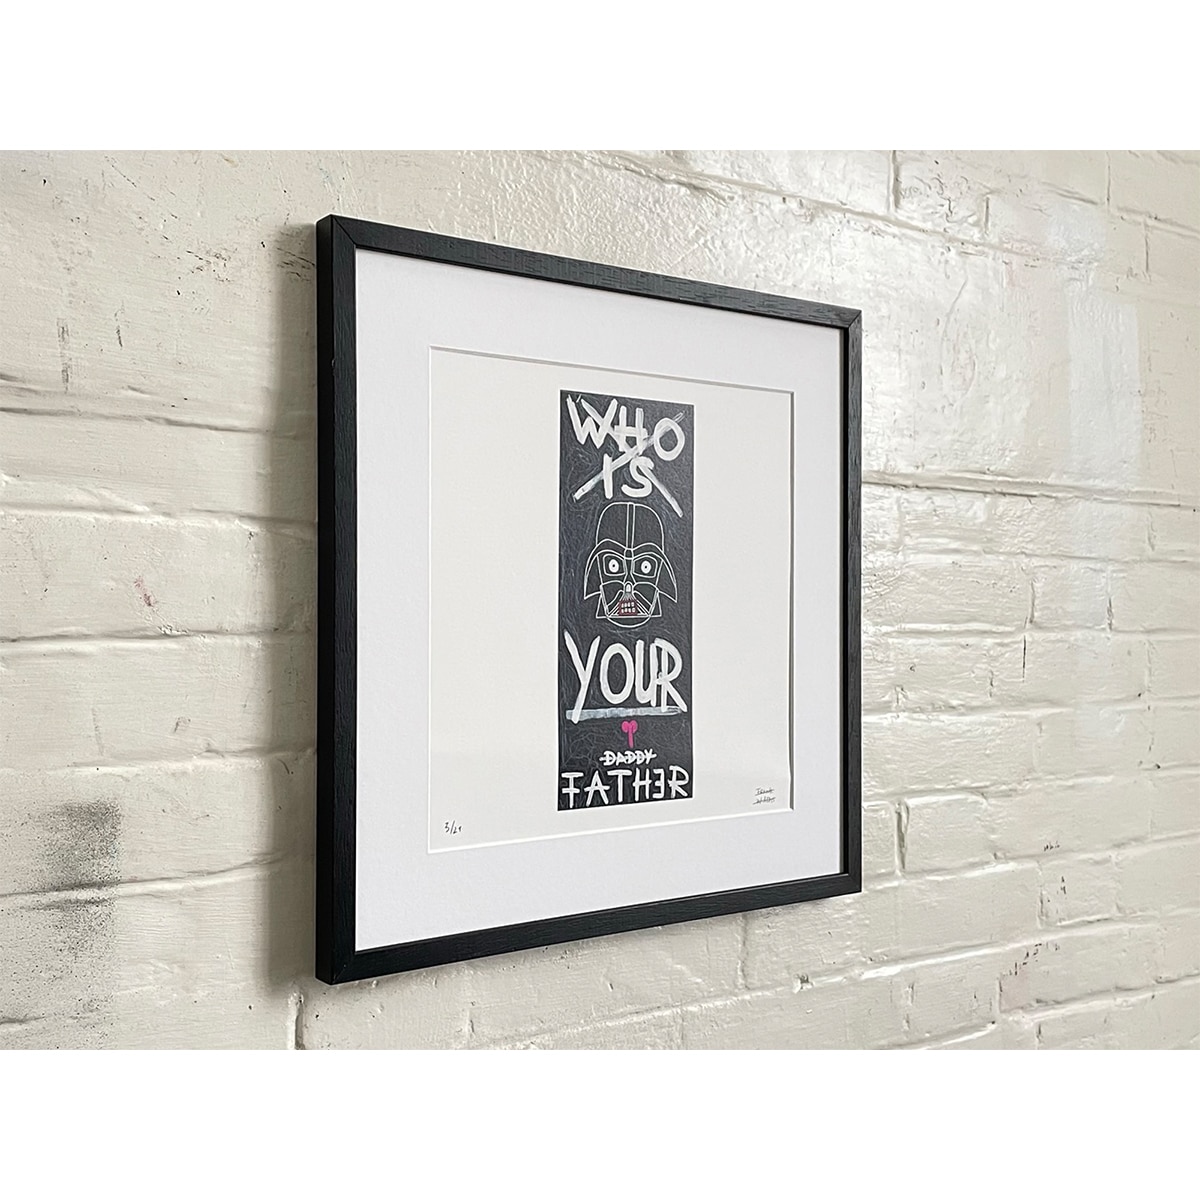 Limited Edt Art Prints -_0000__0000_WHO IS YOUR FATHER 01 - Frank Willems